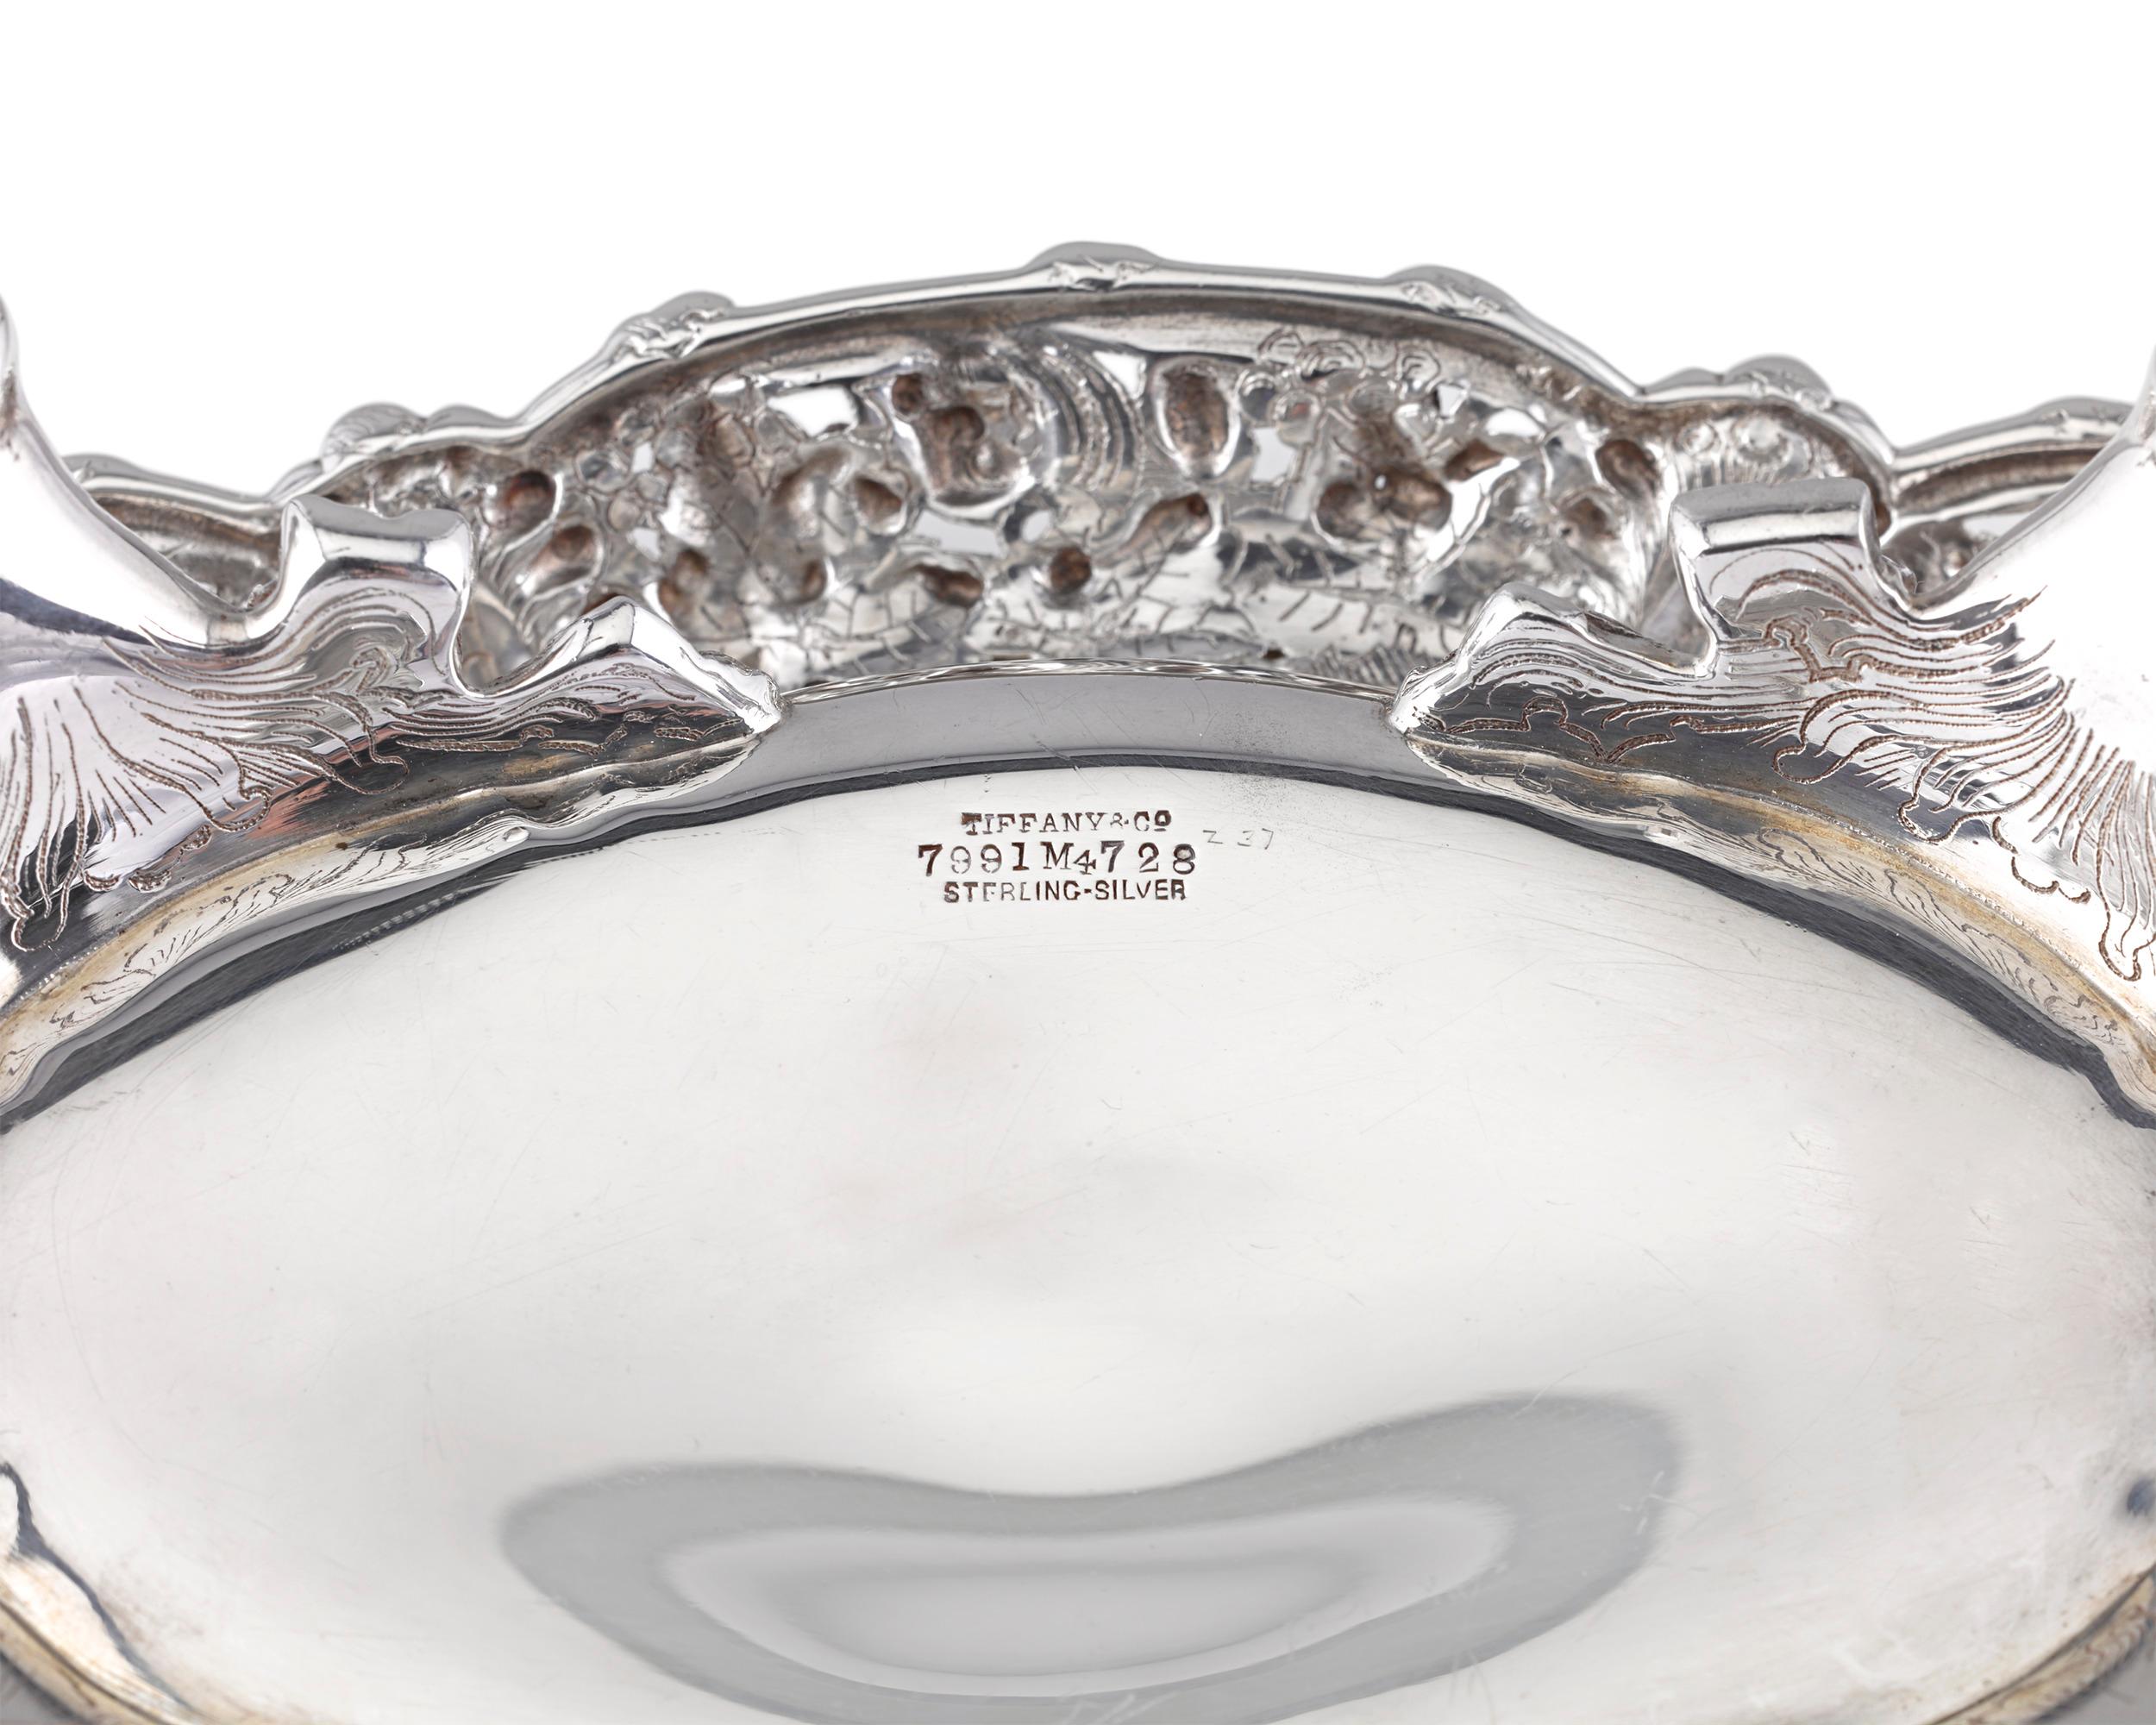 Other Tiffany & Co. Silver Salt Cellars from the Hopkins-Searles Service